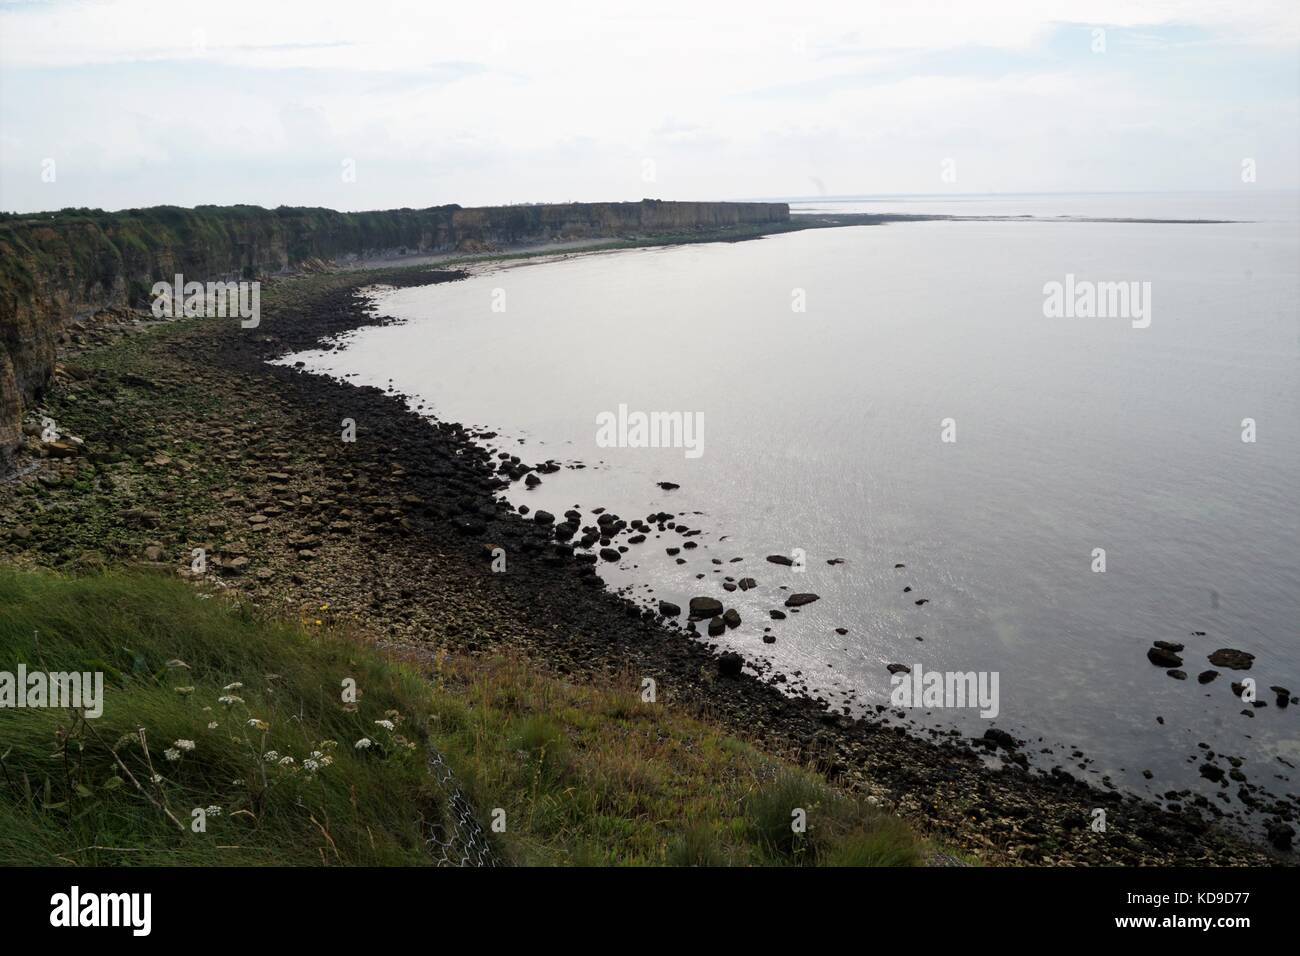 Normandy landings beach - coastline/cliffs surrounded by grass, weeds & mud against a grey sky Stock Photo